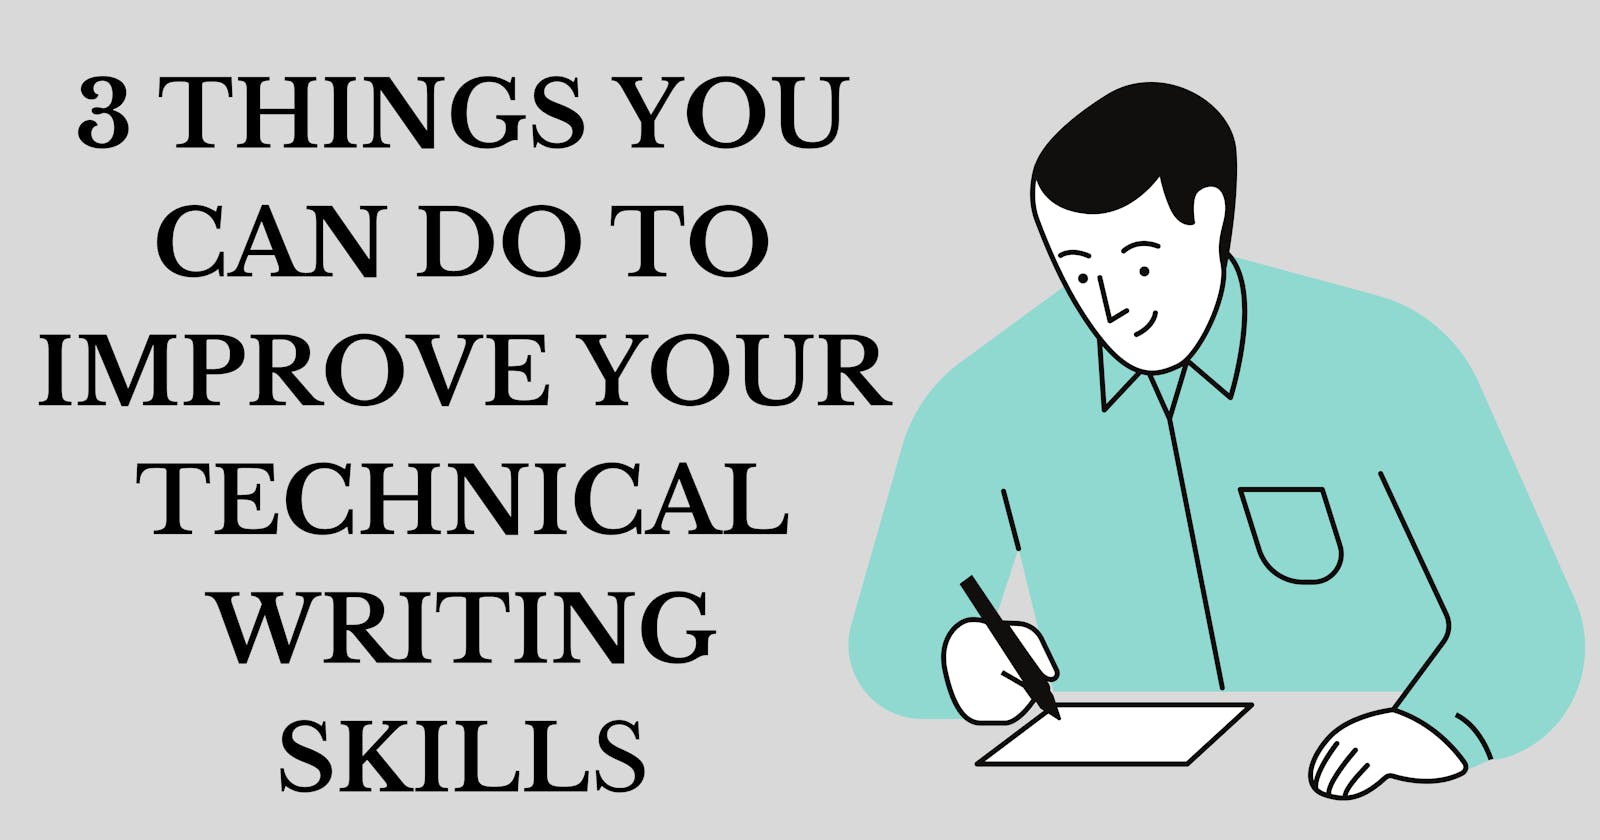 3 Things You Can Do To Improve Your Technical Writing Skills